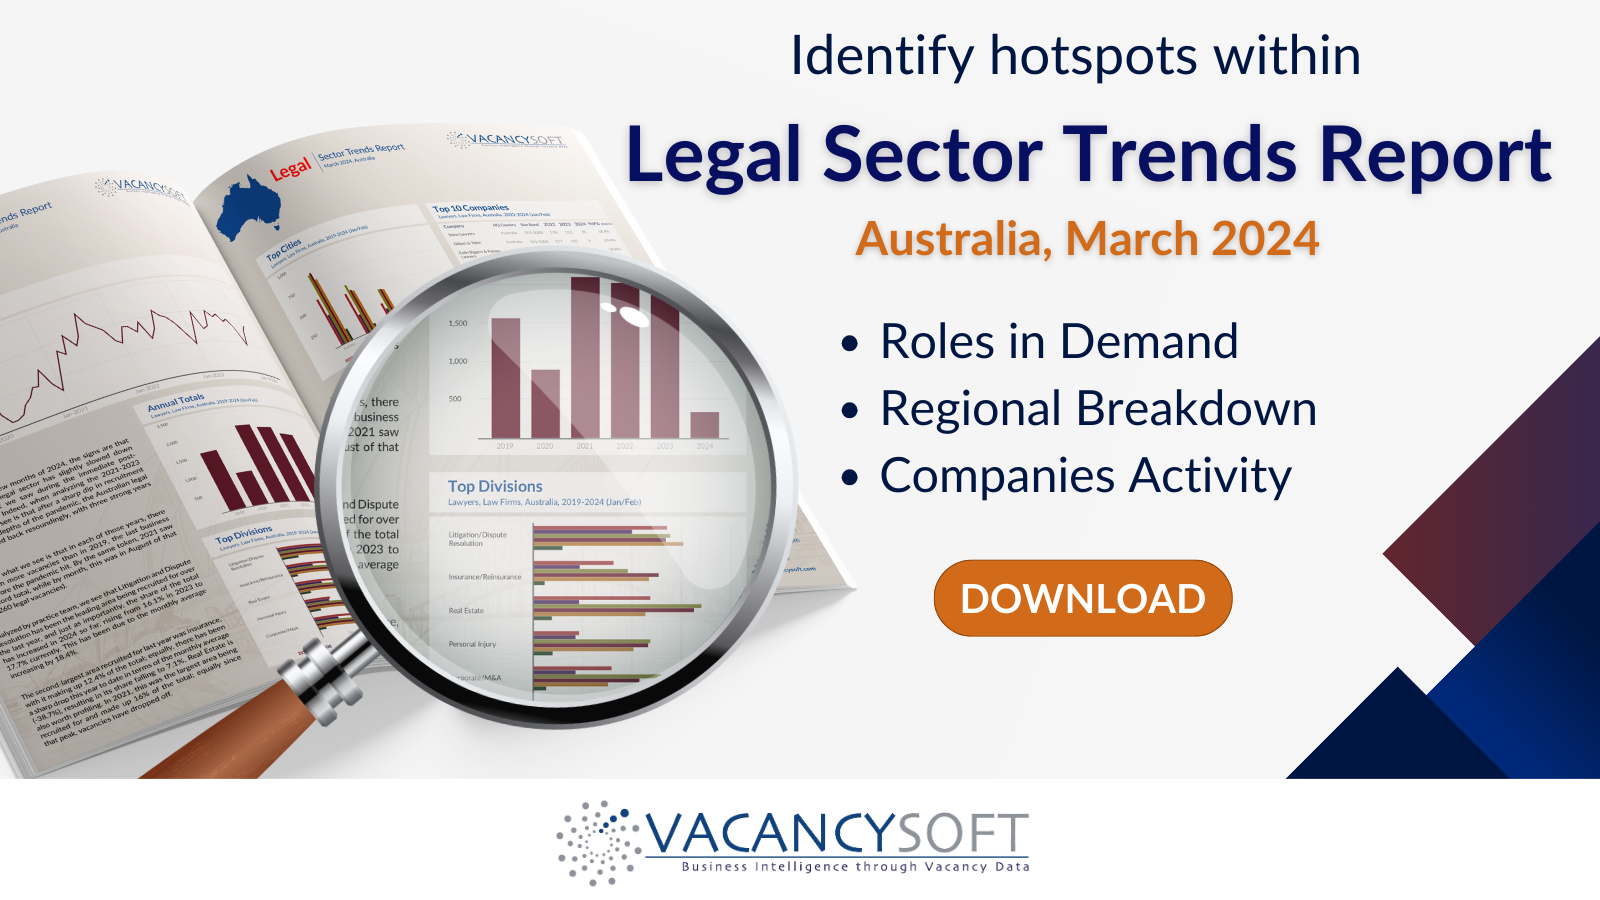 Australia Legal Sector Trends, March 2024